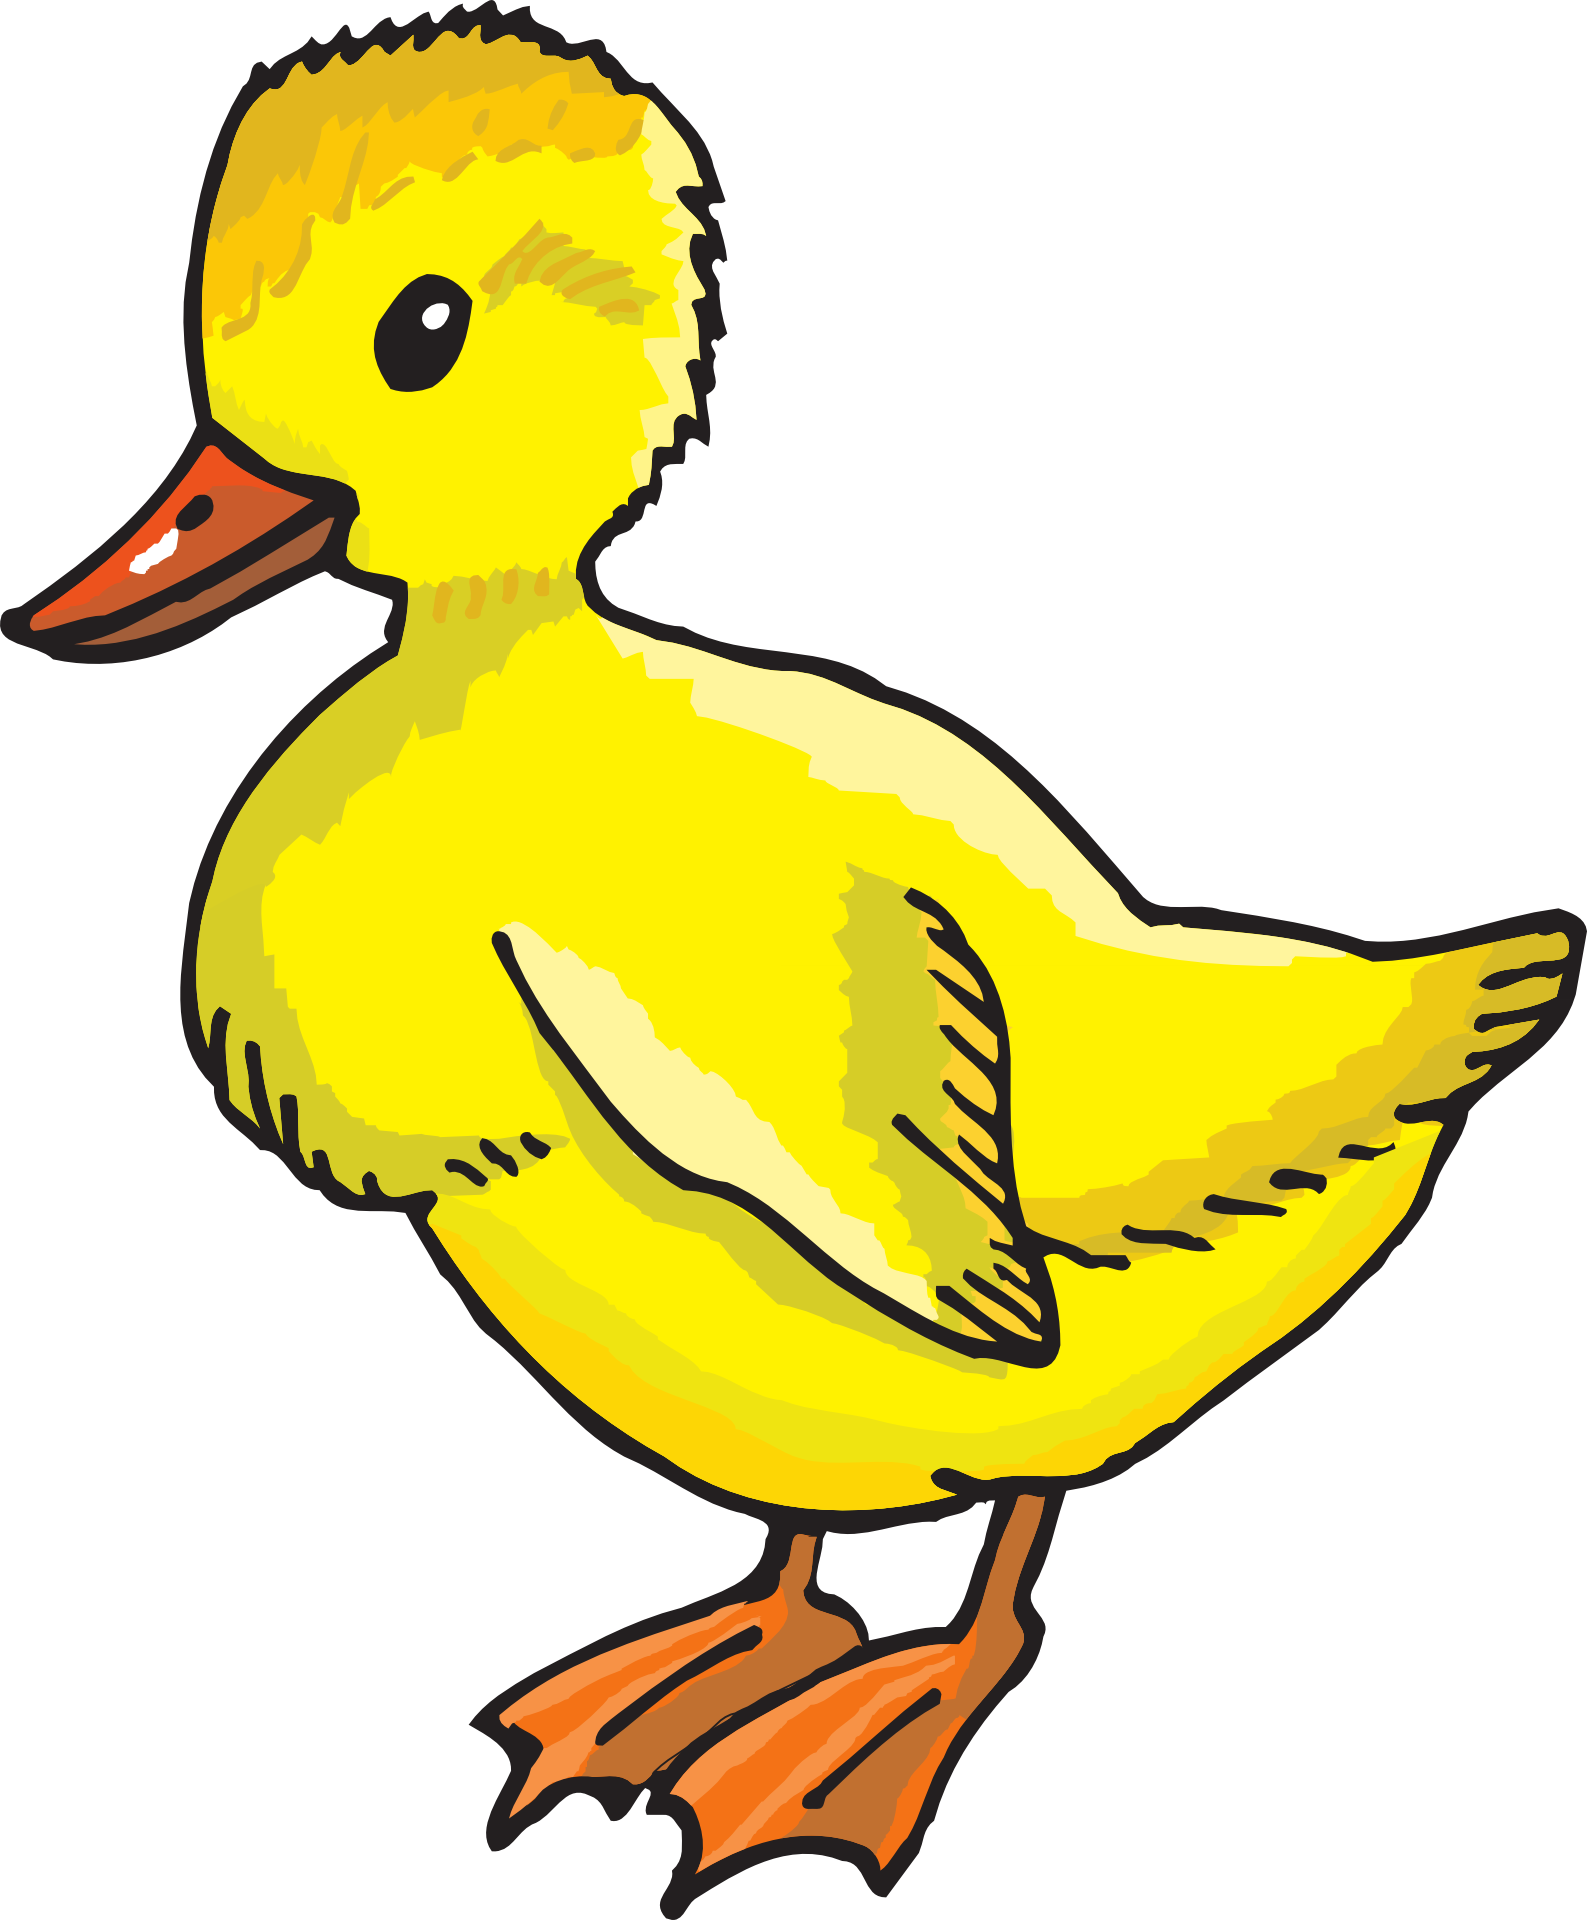 Duckling clipart follow me. Yellow frames illustrations hd